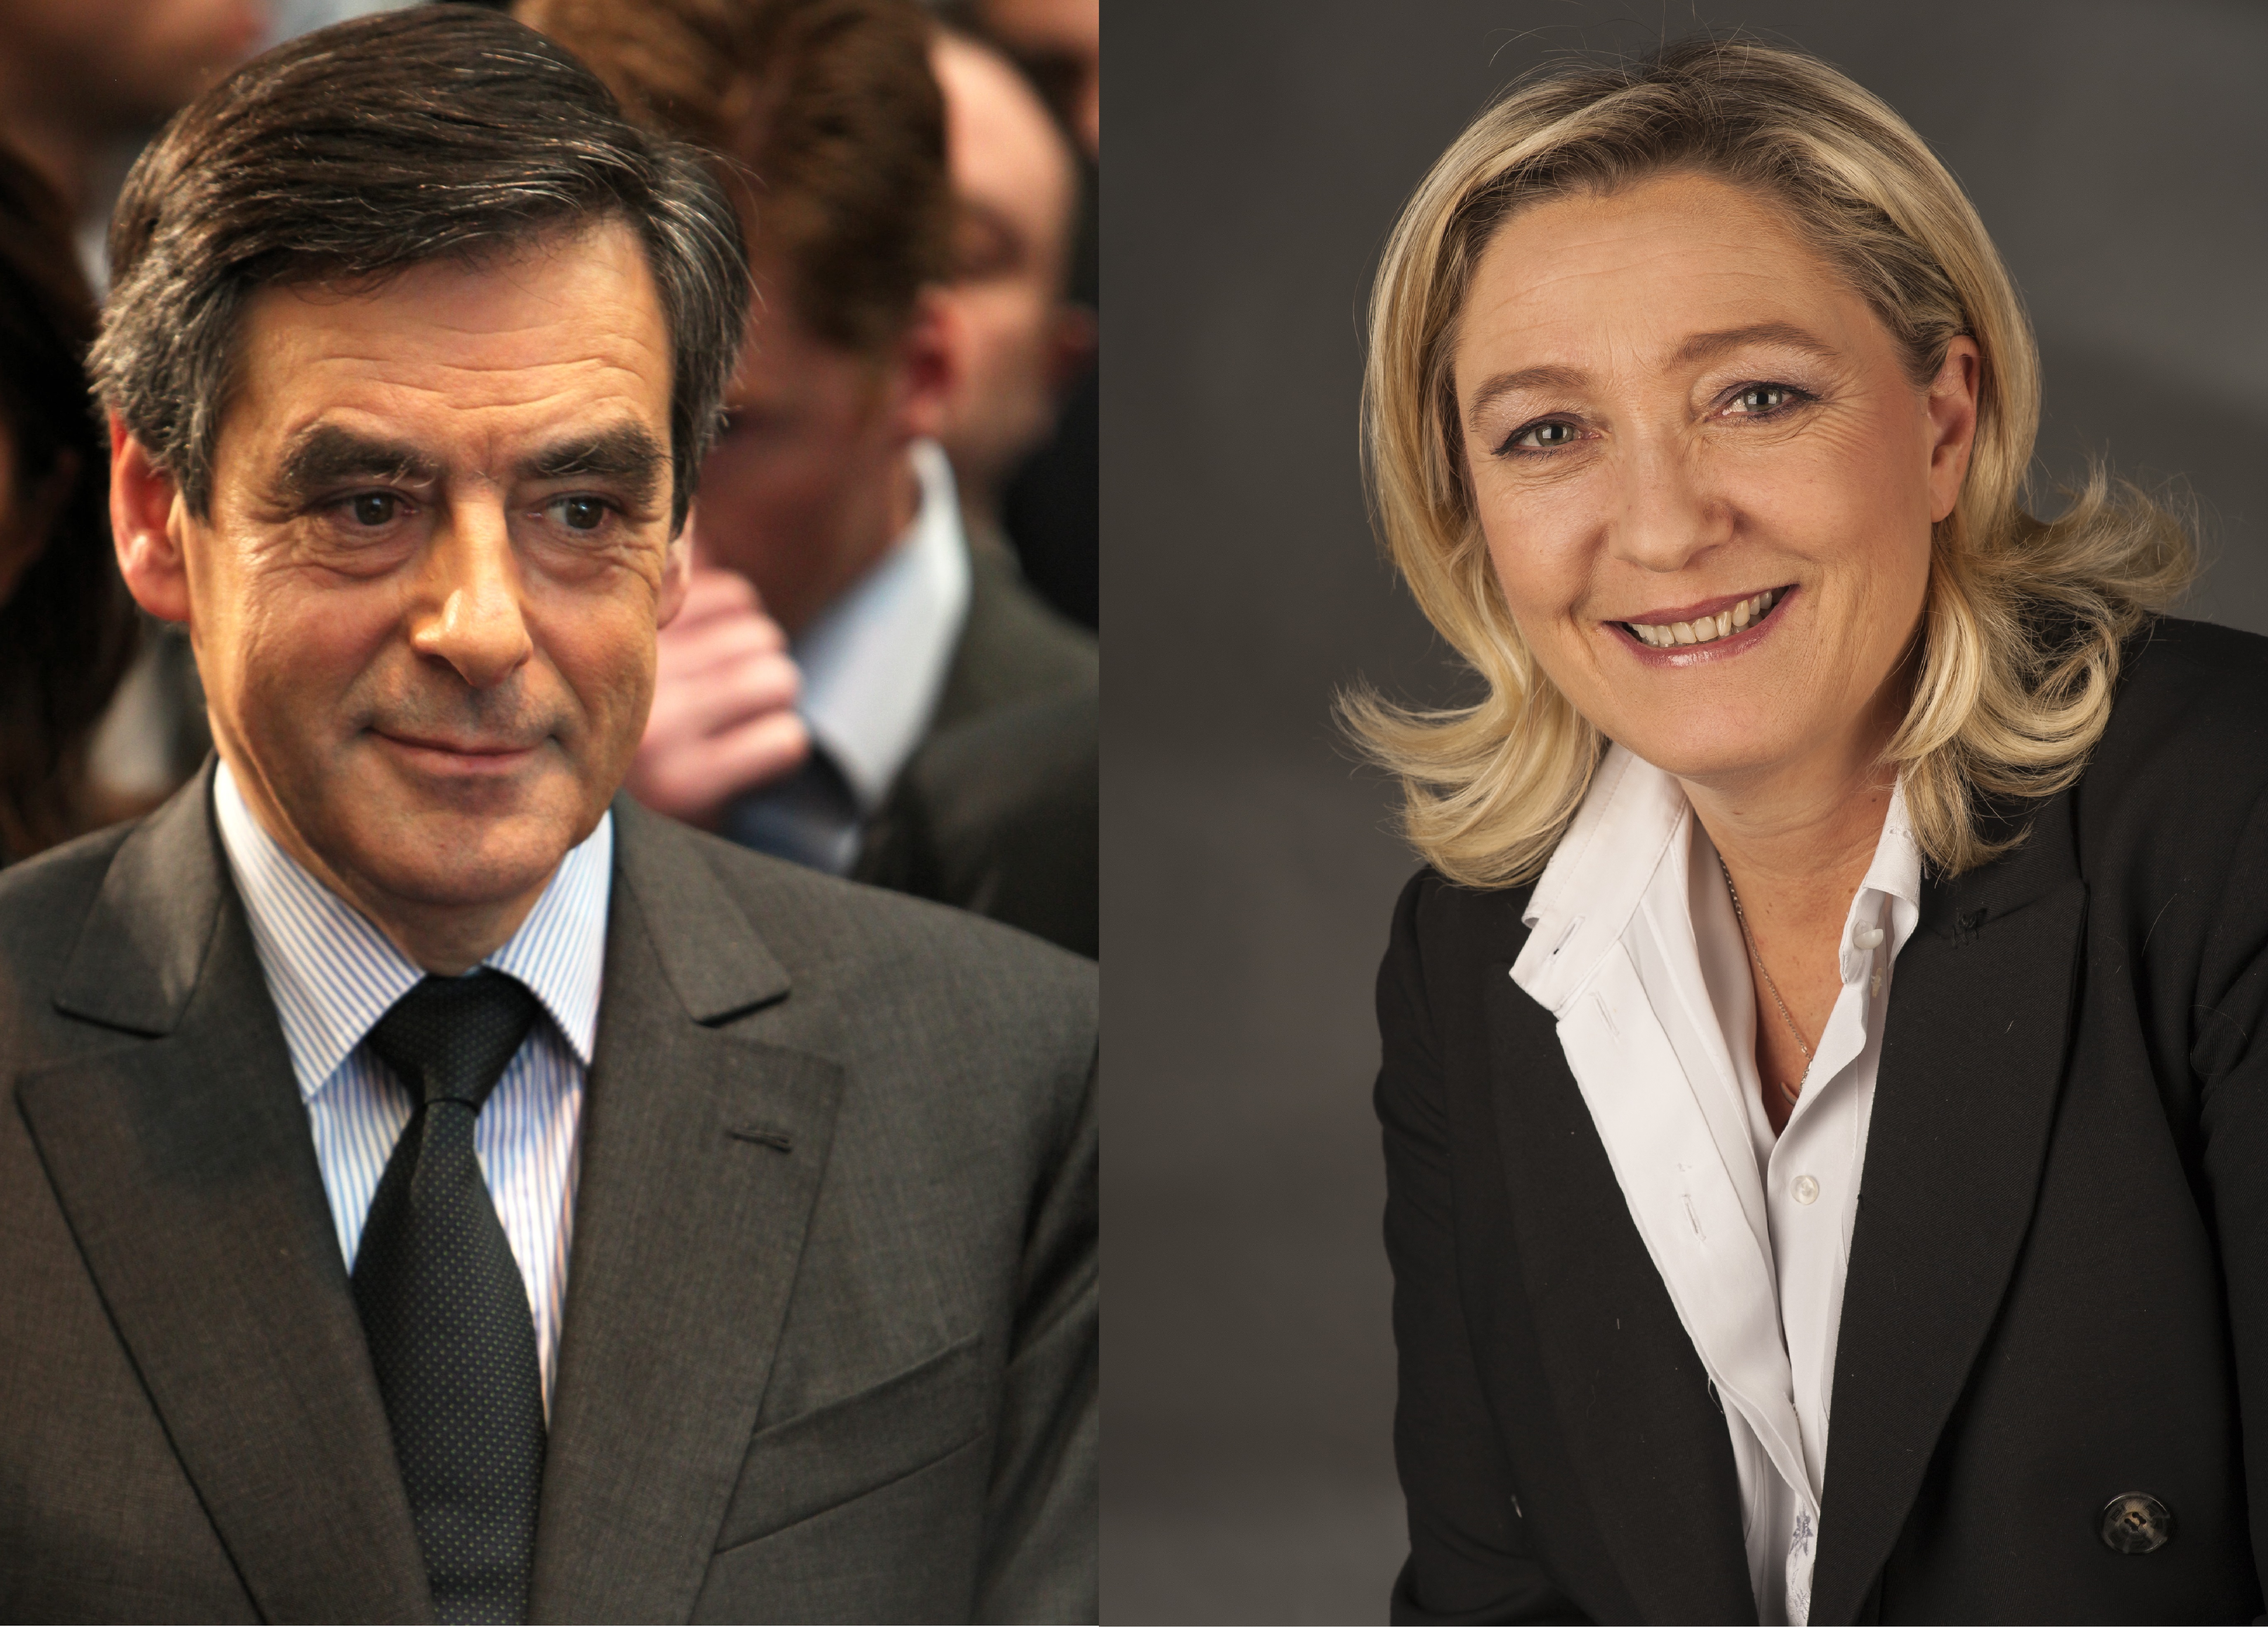 MyFrenchLife™ – MyFrenchLife.org - French election process - 2017 presidential election - France - Francois Fillon - Marine Le Pen